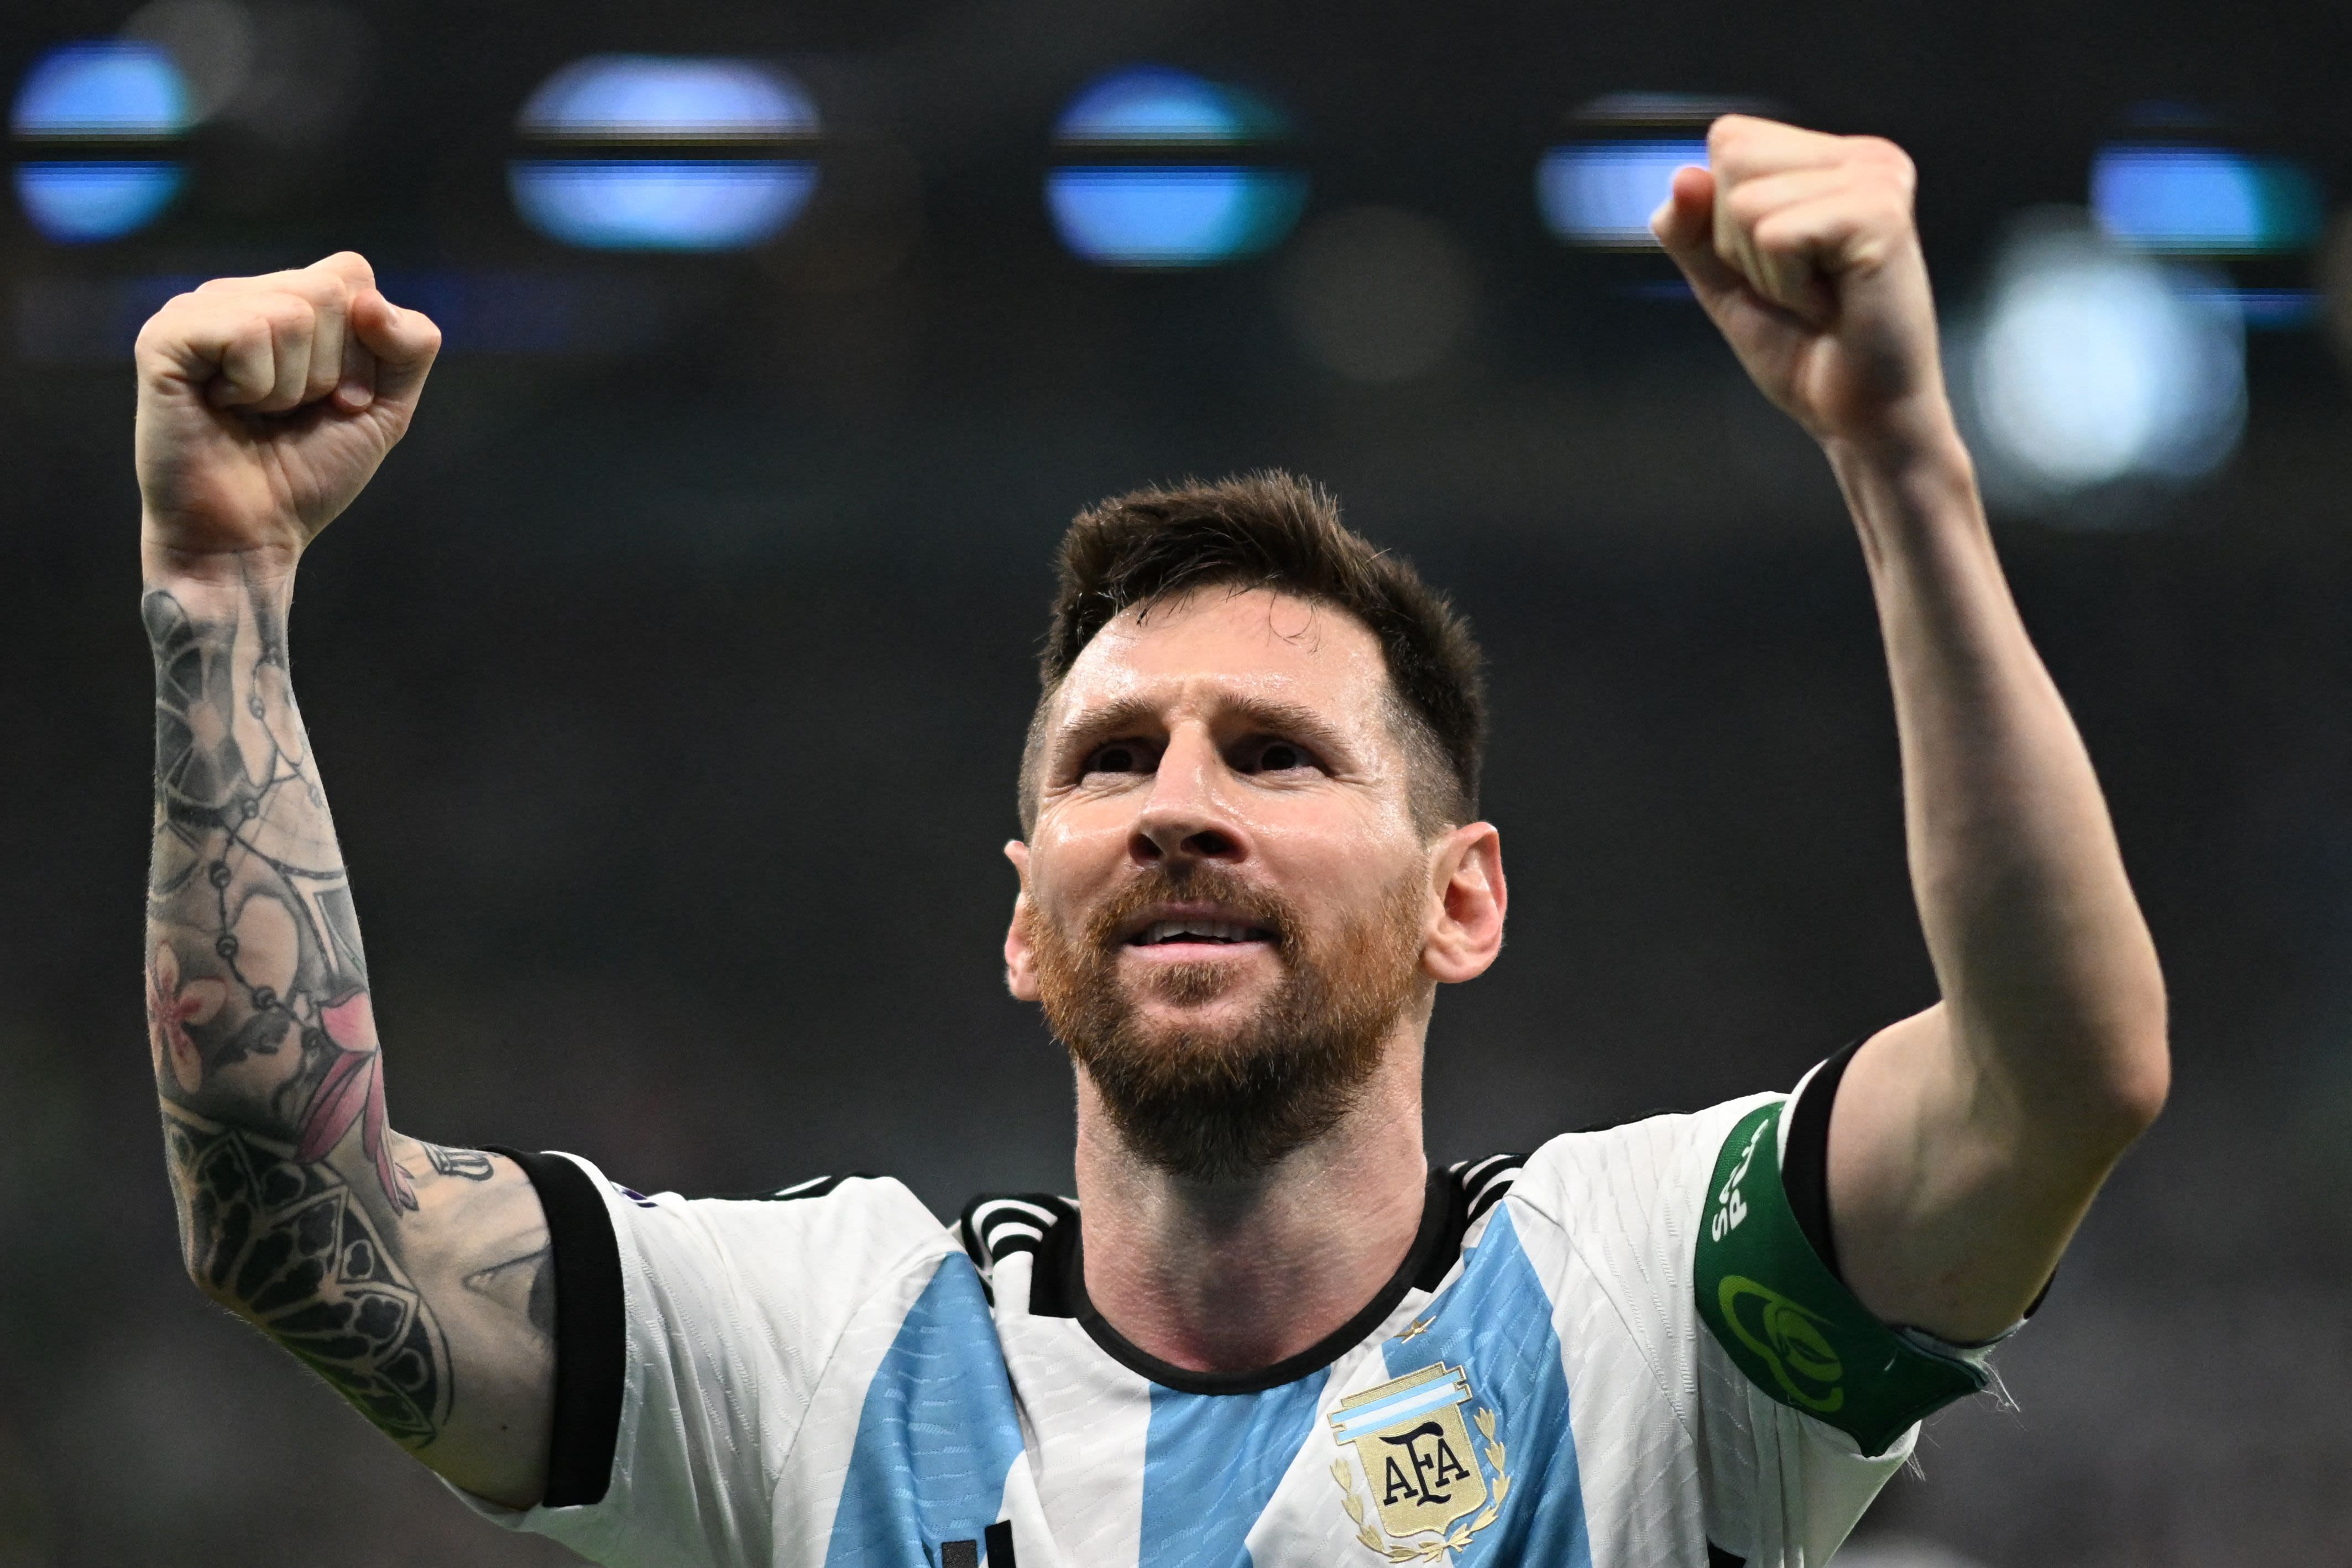 kerala argentina fan boy to meet messi in qatar reportedly